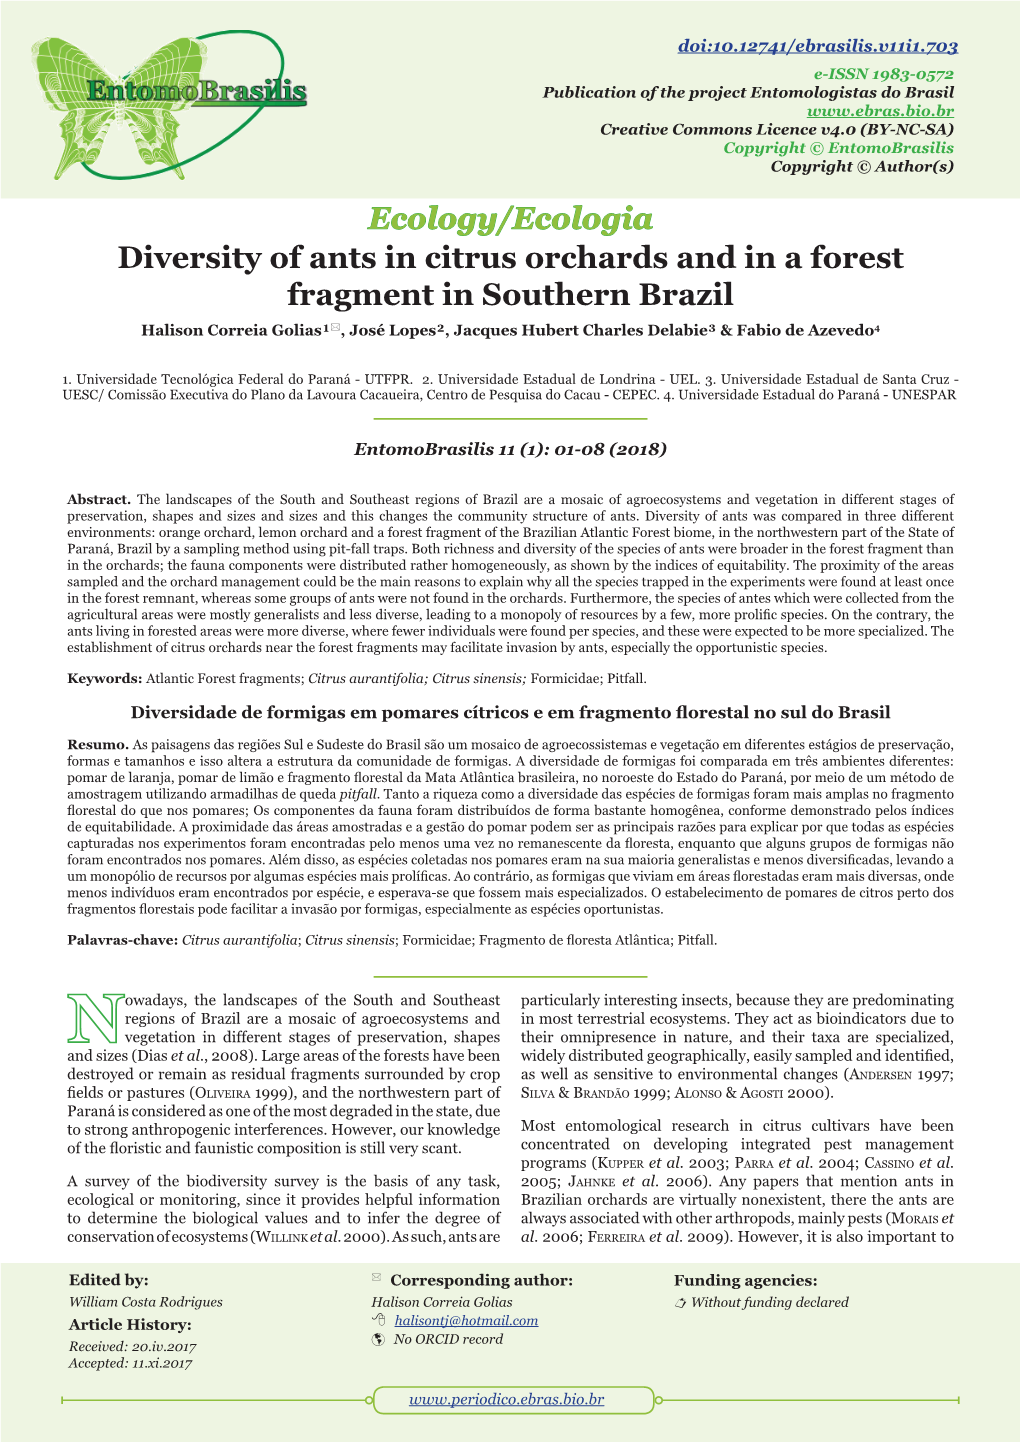 Diversity of Ants in Citrus Orchards and in a Forest Fragment in Southern Brazil